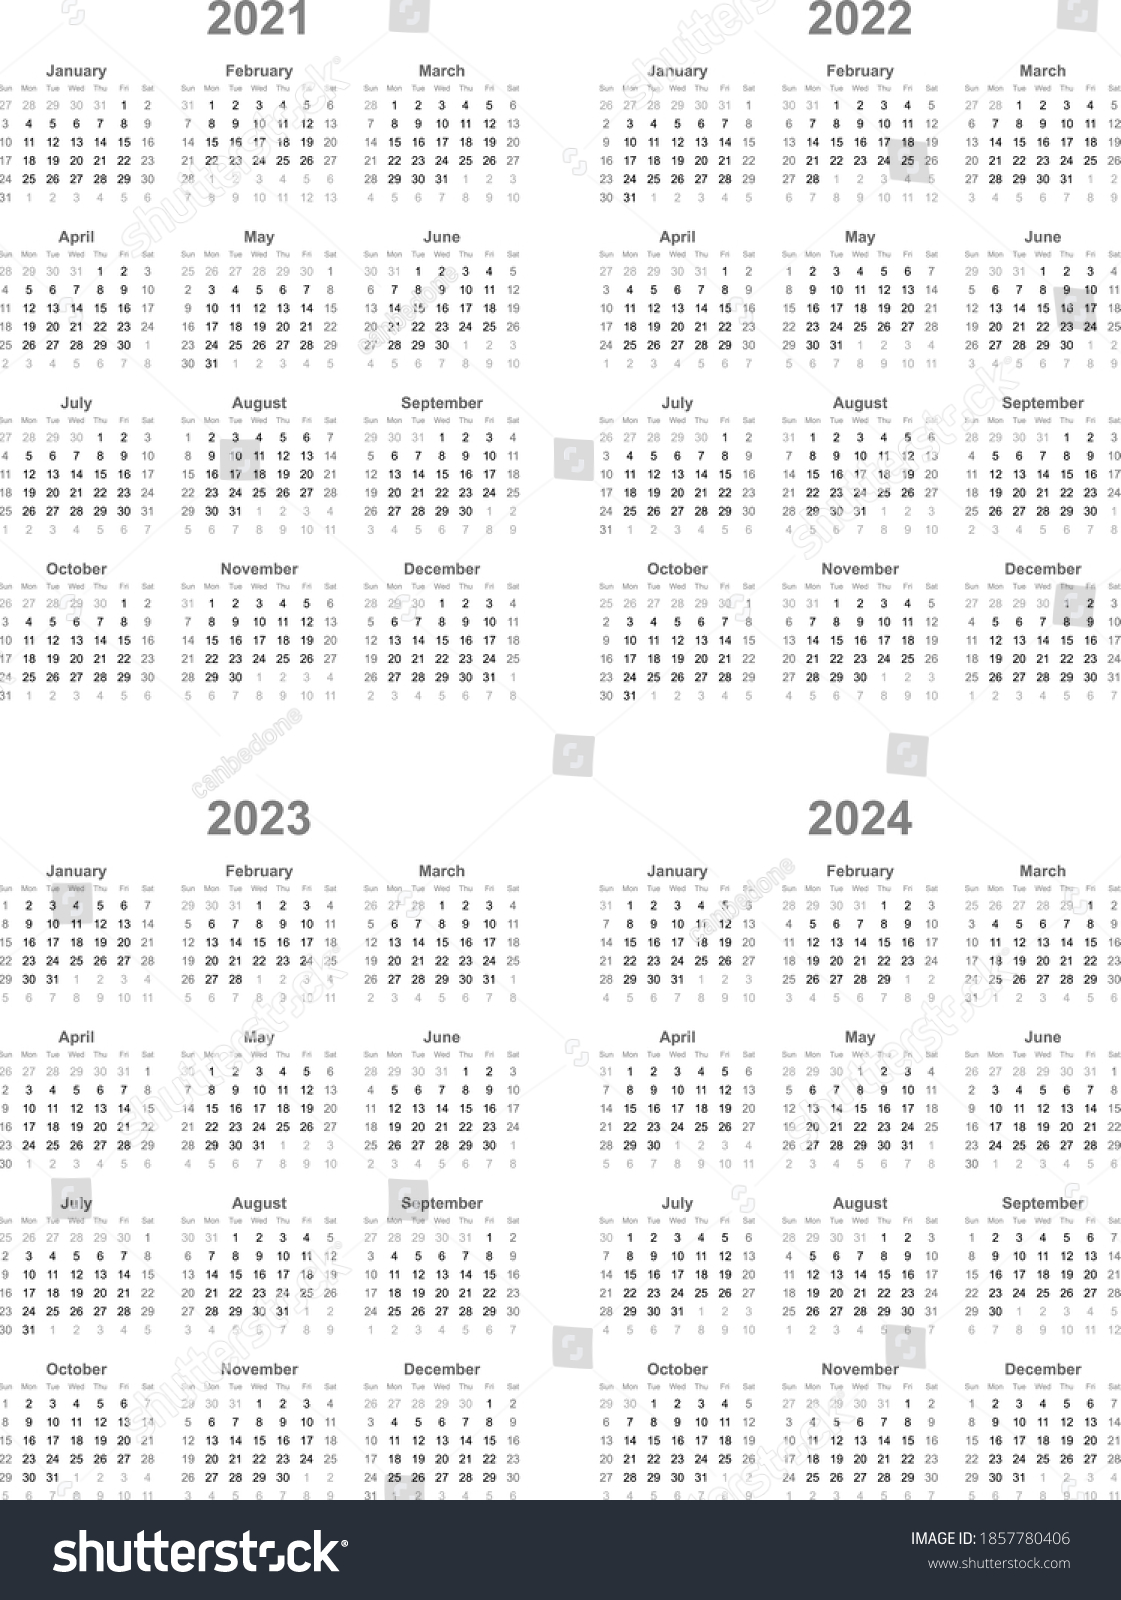 Simple Calendar Layout 2021 2022 2023 2024 Years - Royalty Free Stock 